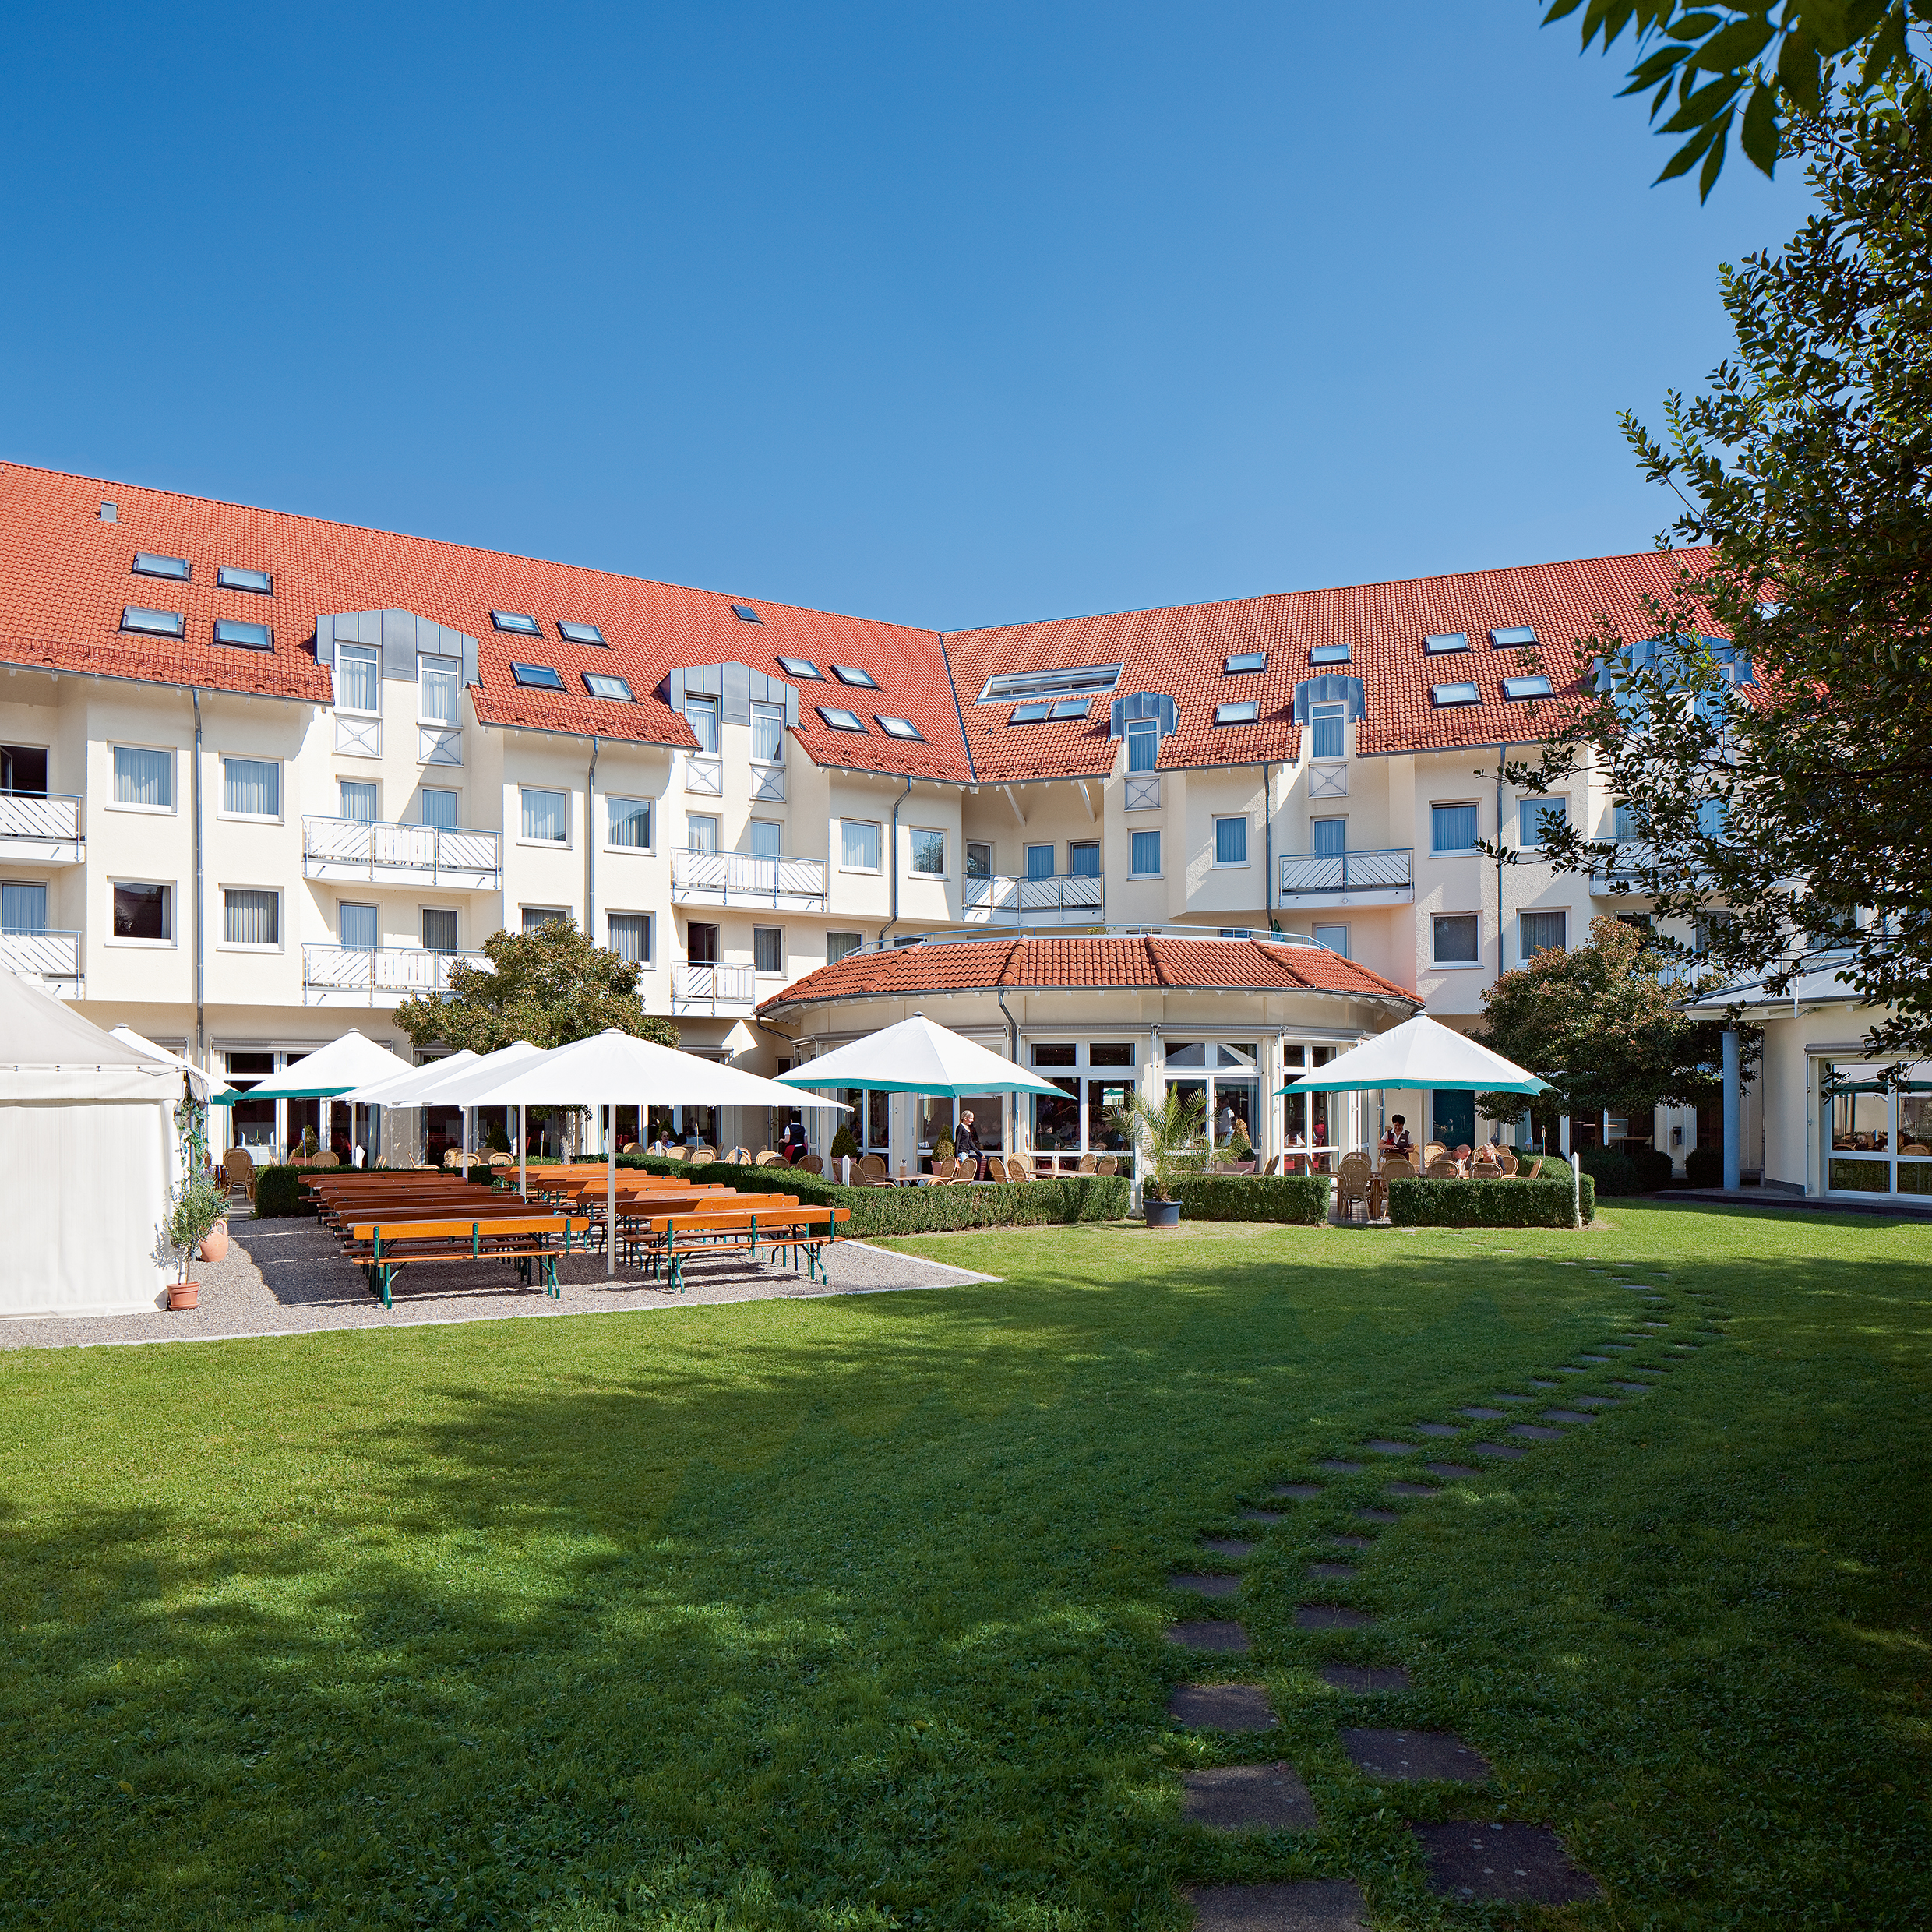 Seminaris Hotel Bad Boll <br/>59.00 ew <br/> <a href='http://vakantieoplossing.nl/outpage/?id=be68d5d52f401188cb335b659b46274a' target='_blank'>View Details</a>